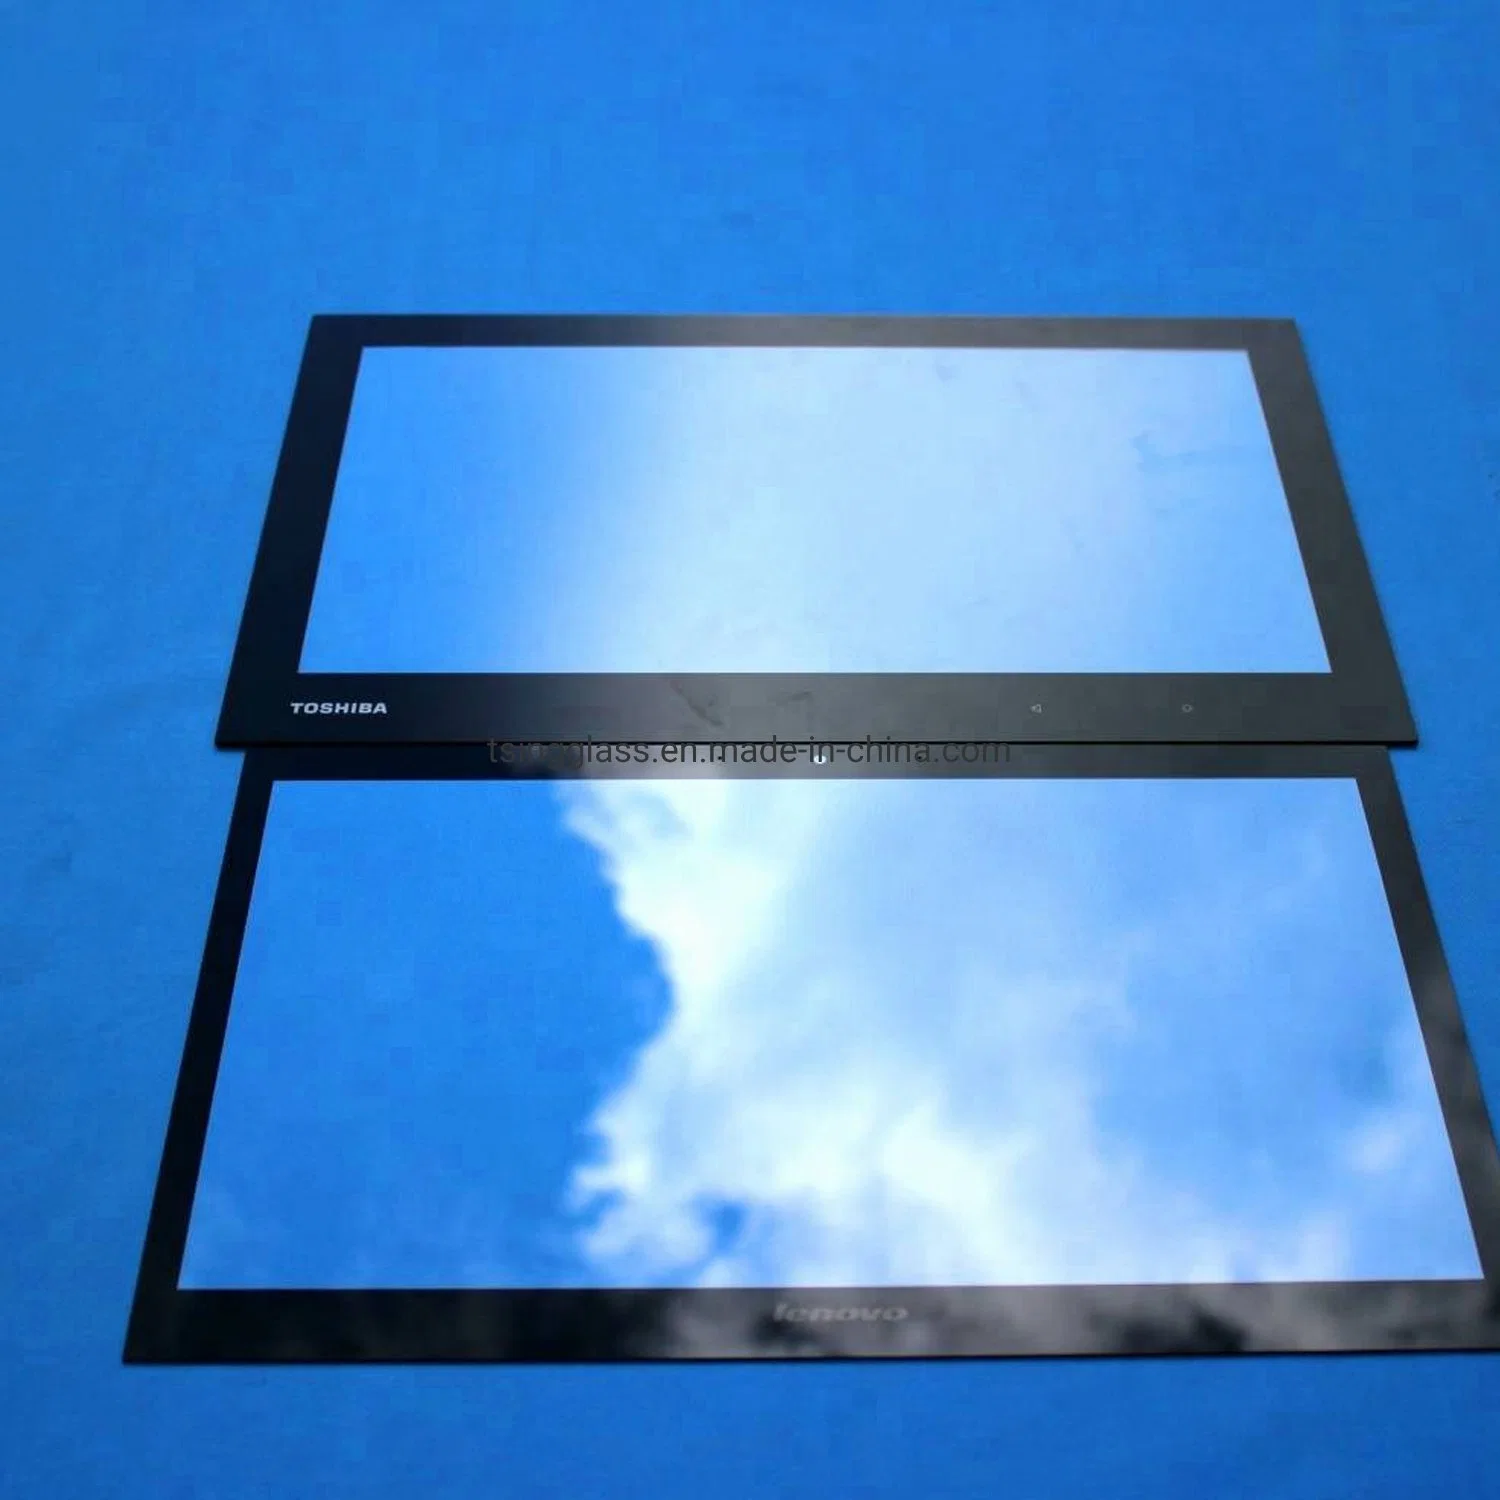 2mm LCD Display Panel Cover Glass Anti Glare Glass for Frame Glass/Reflective Glass